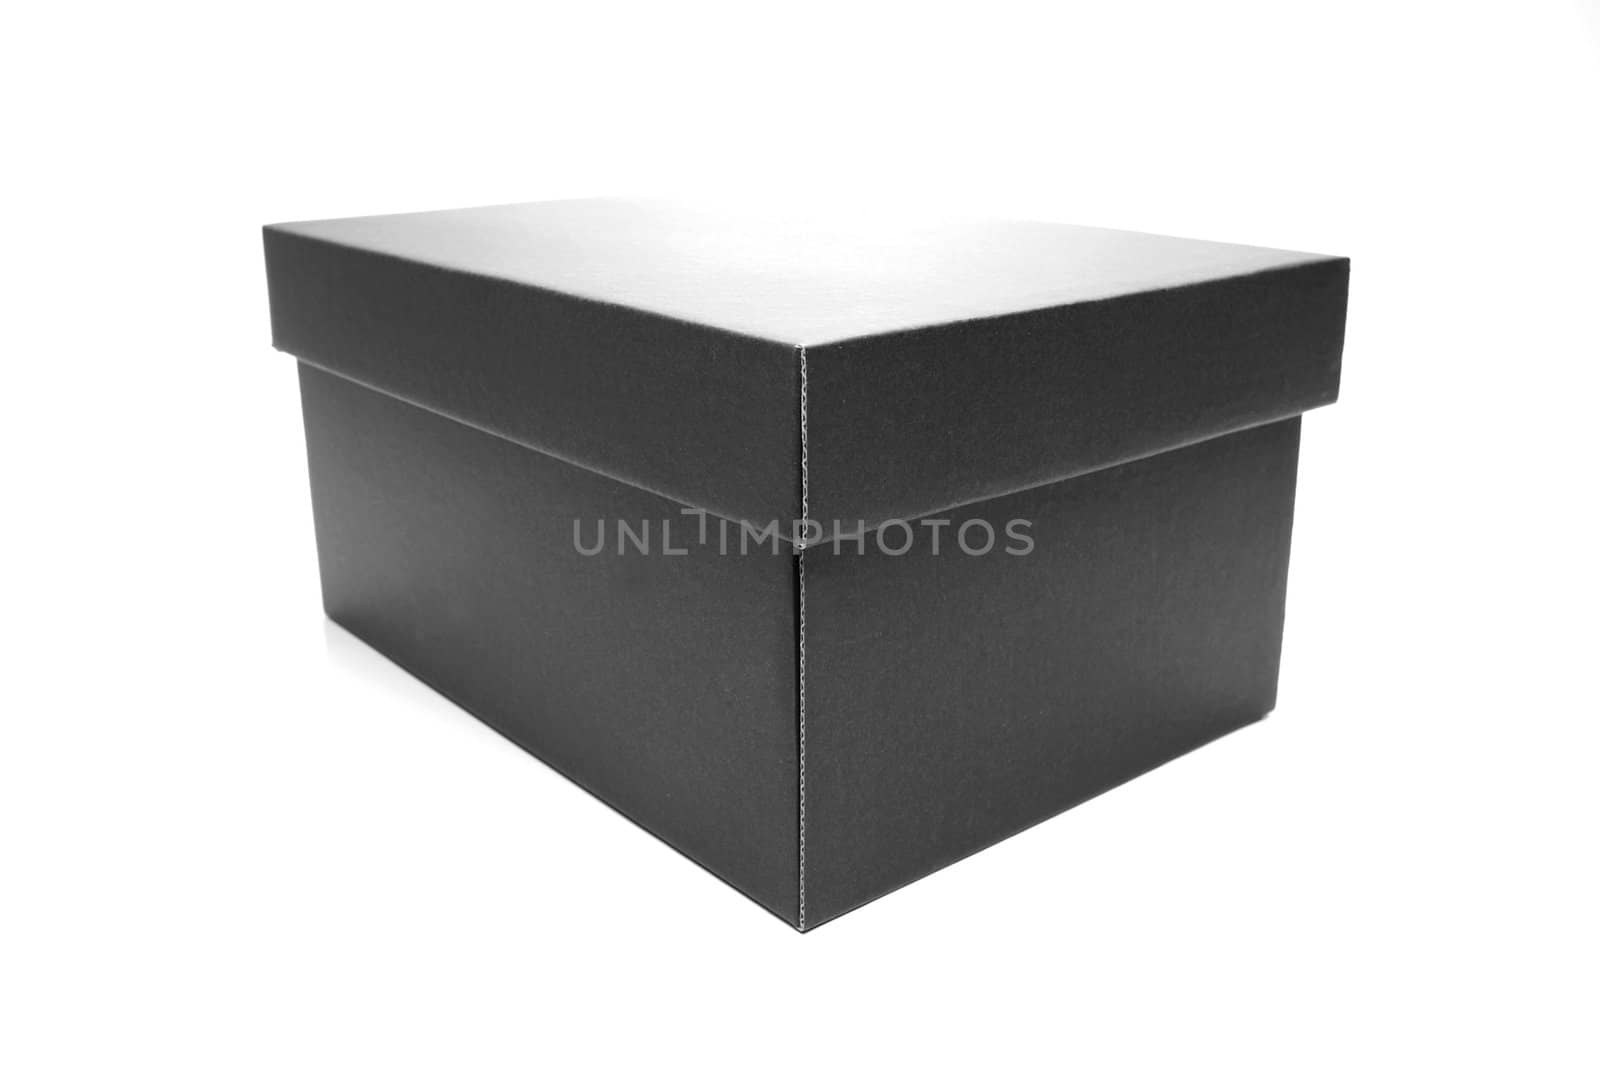 Black gift box isolated against a white background